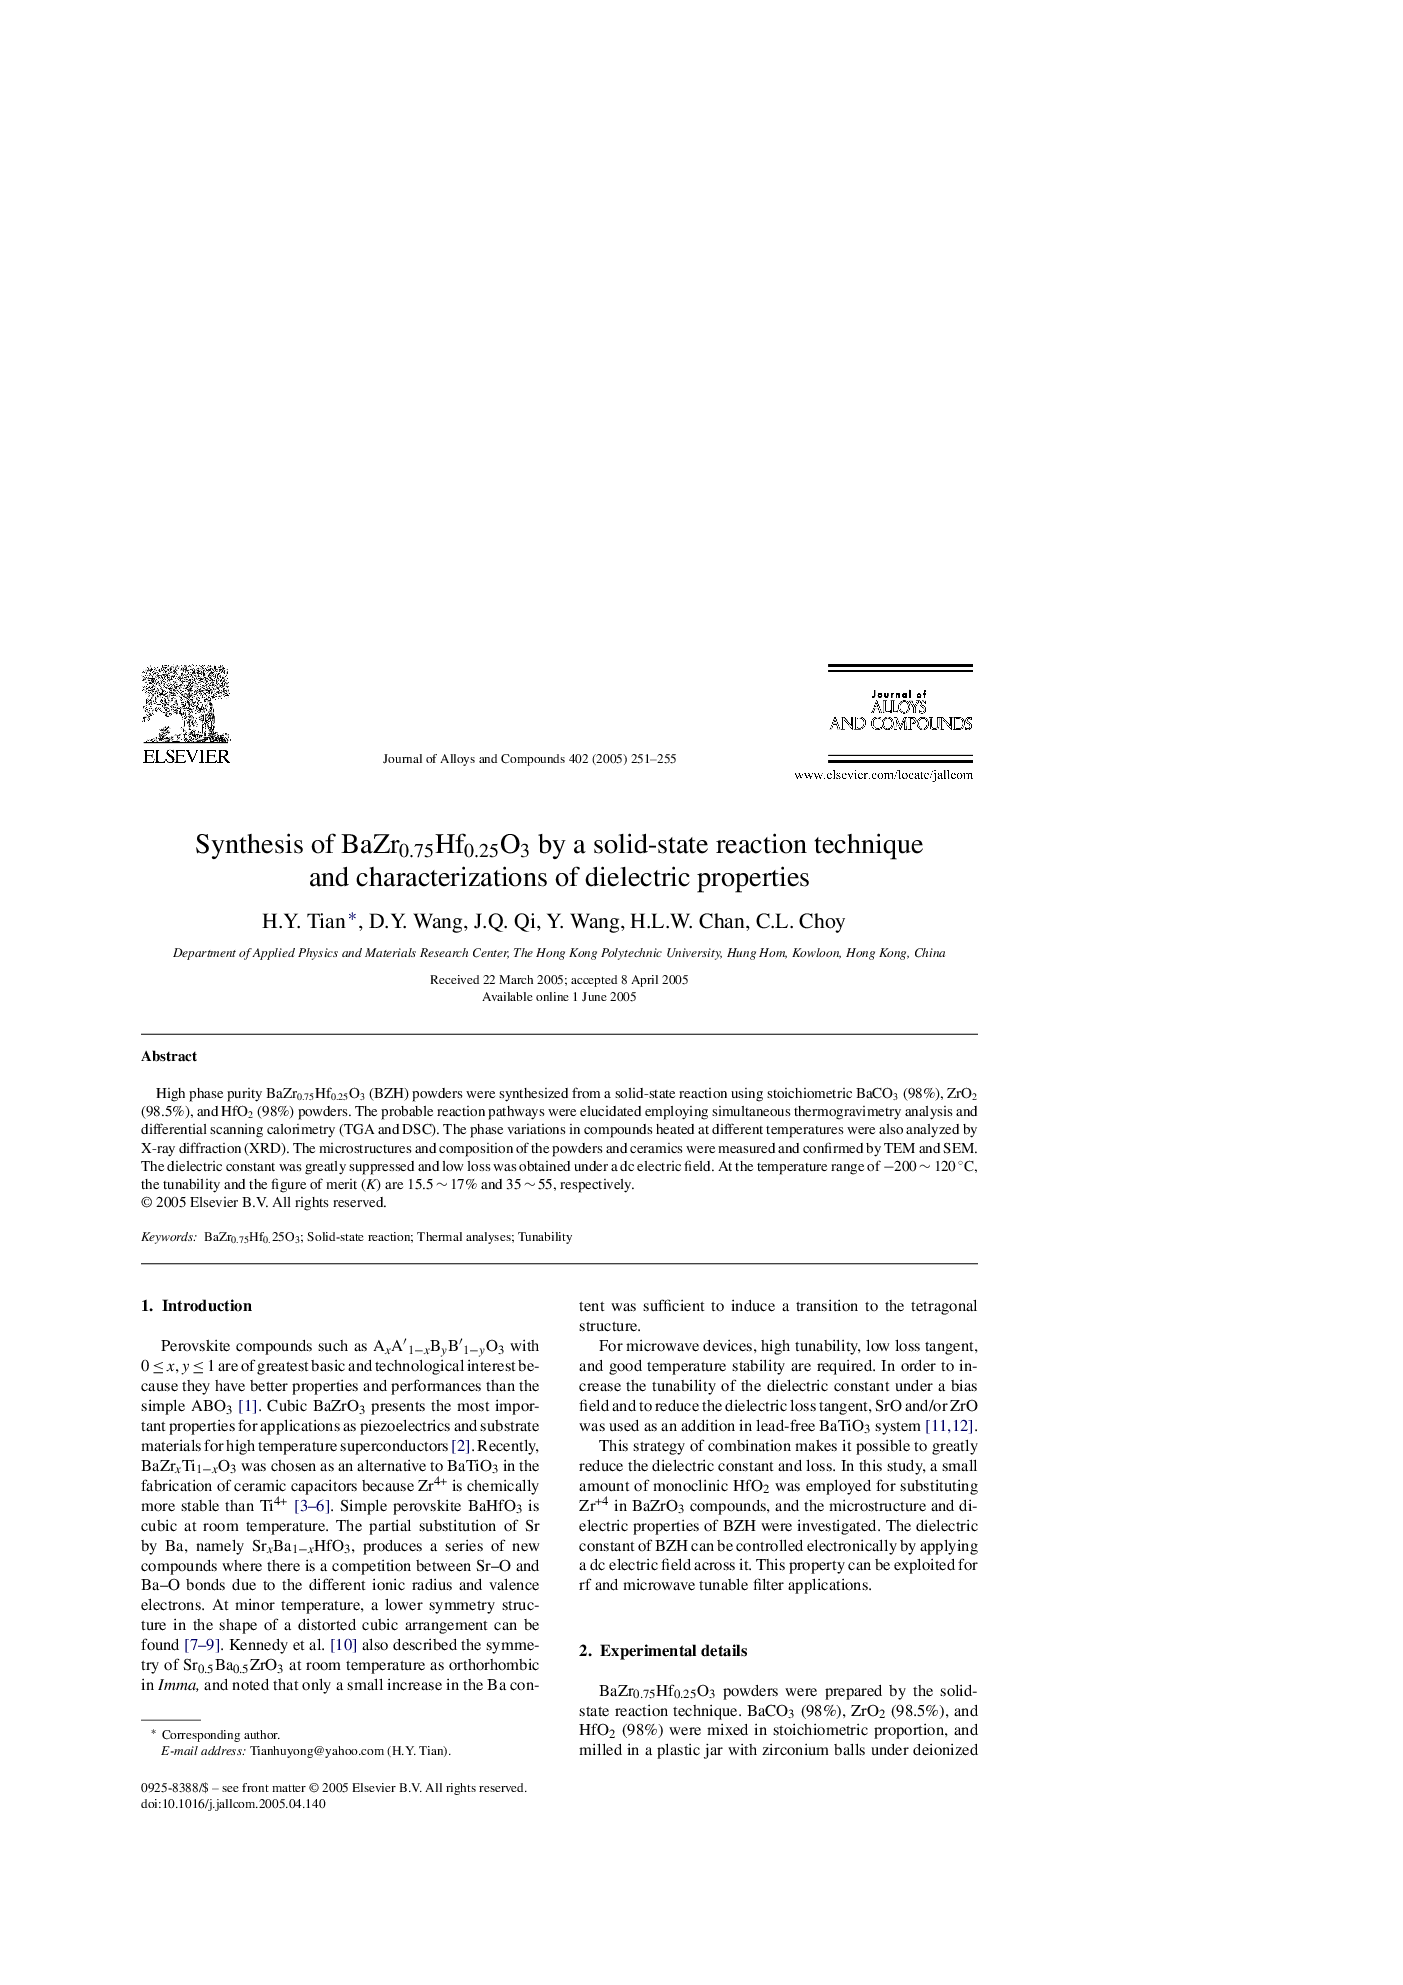 Synthesis of BaZr0.75Hf0.25O3 by a solid-state reaction technique and characterizations of dielectric properties